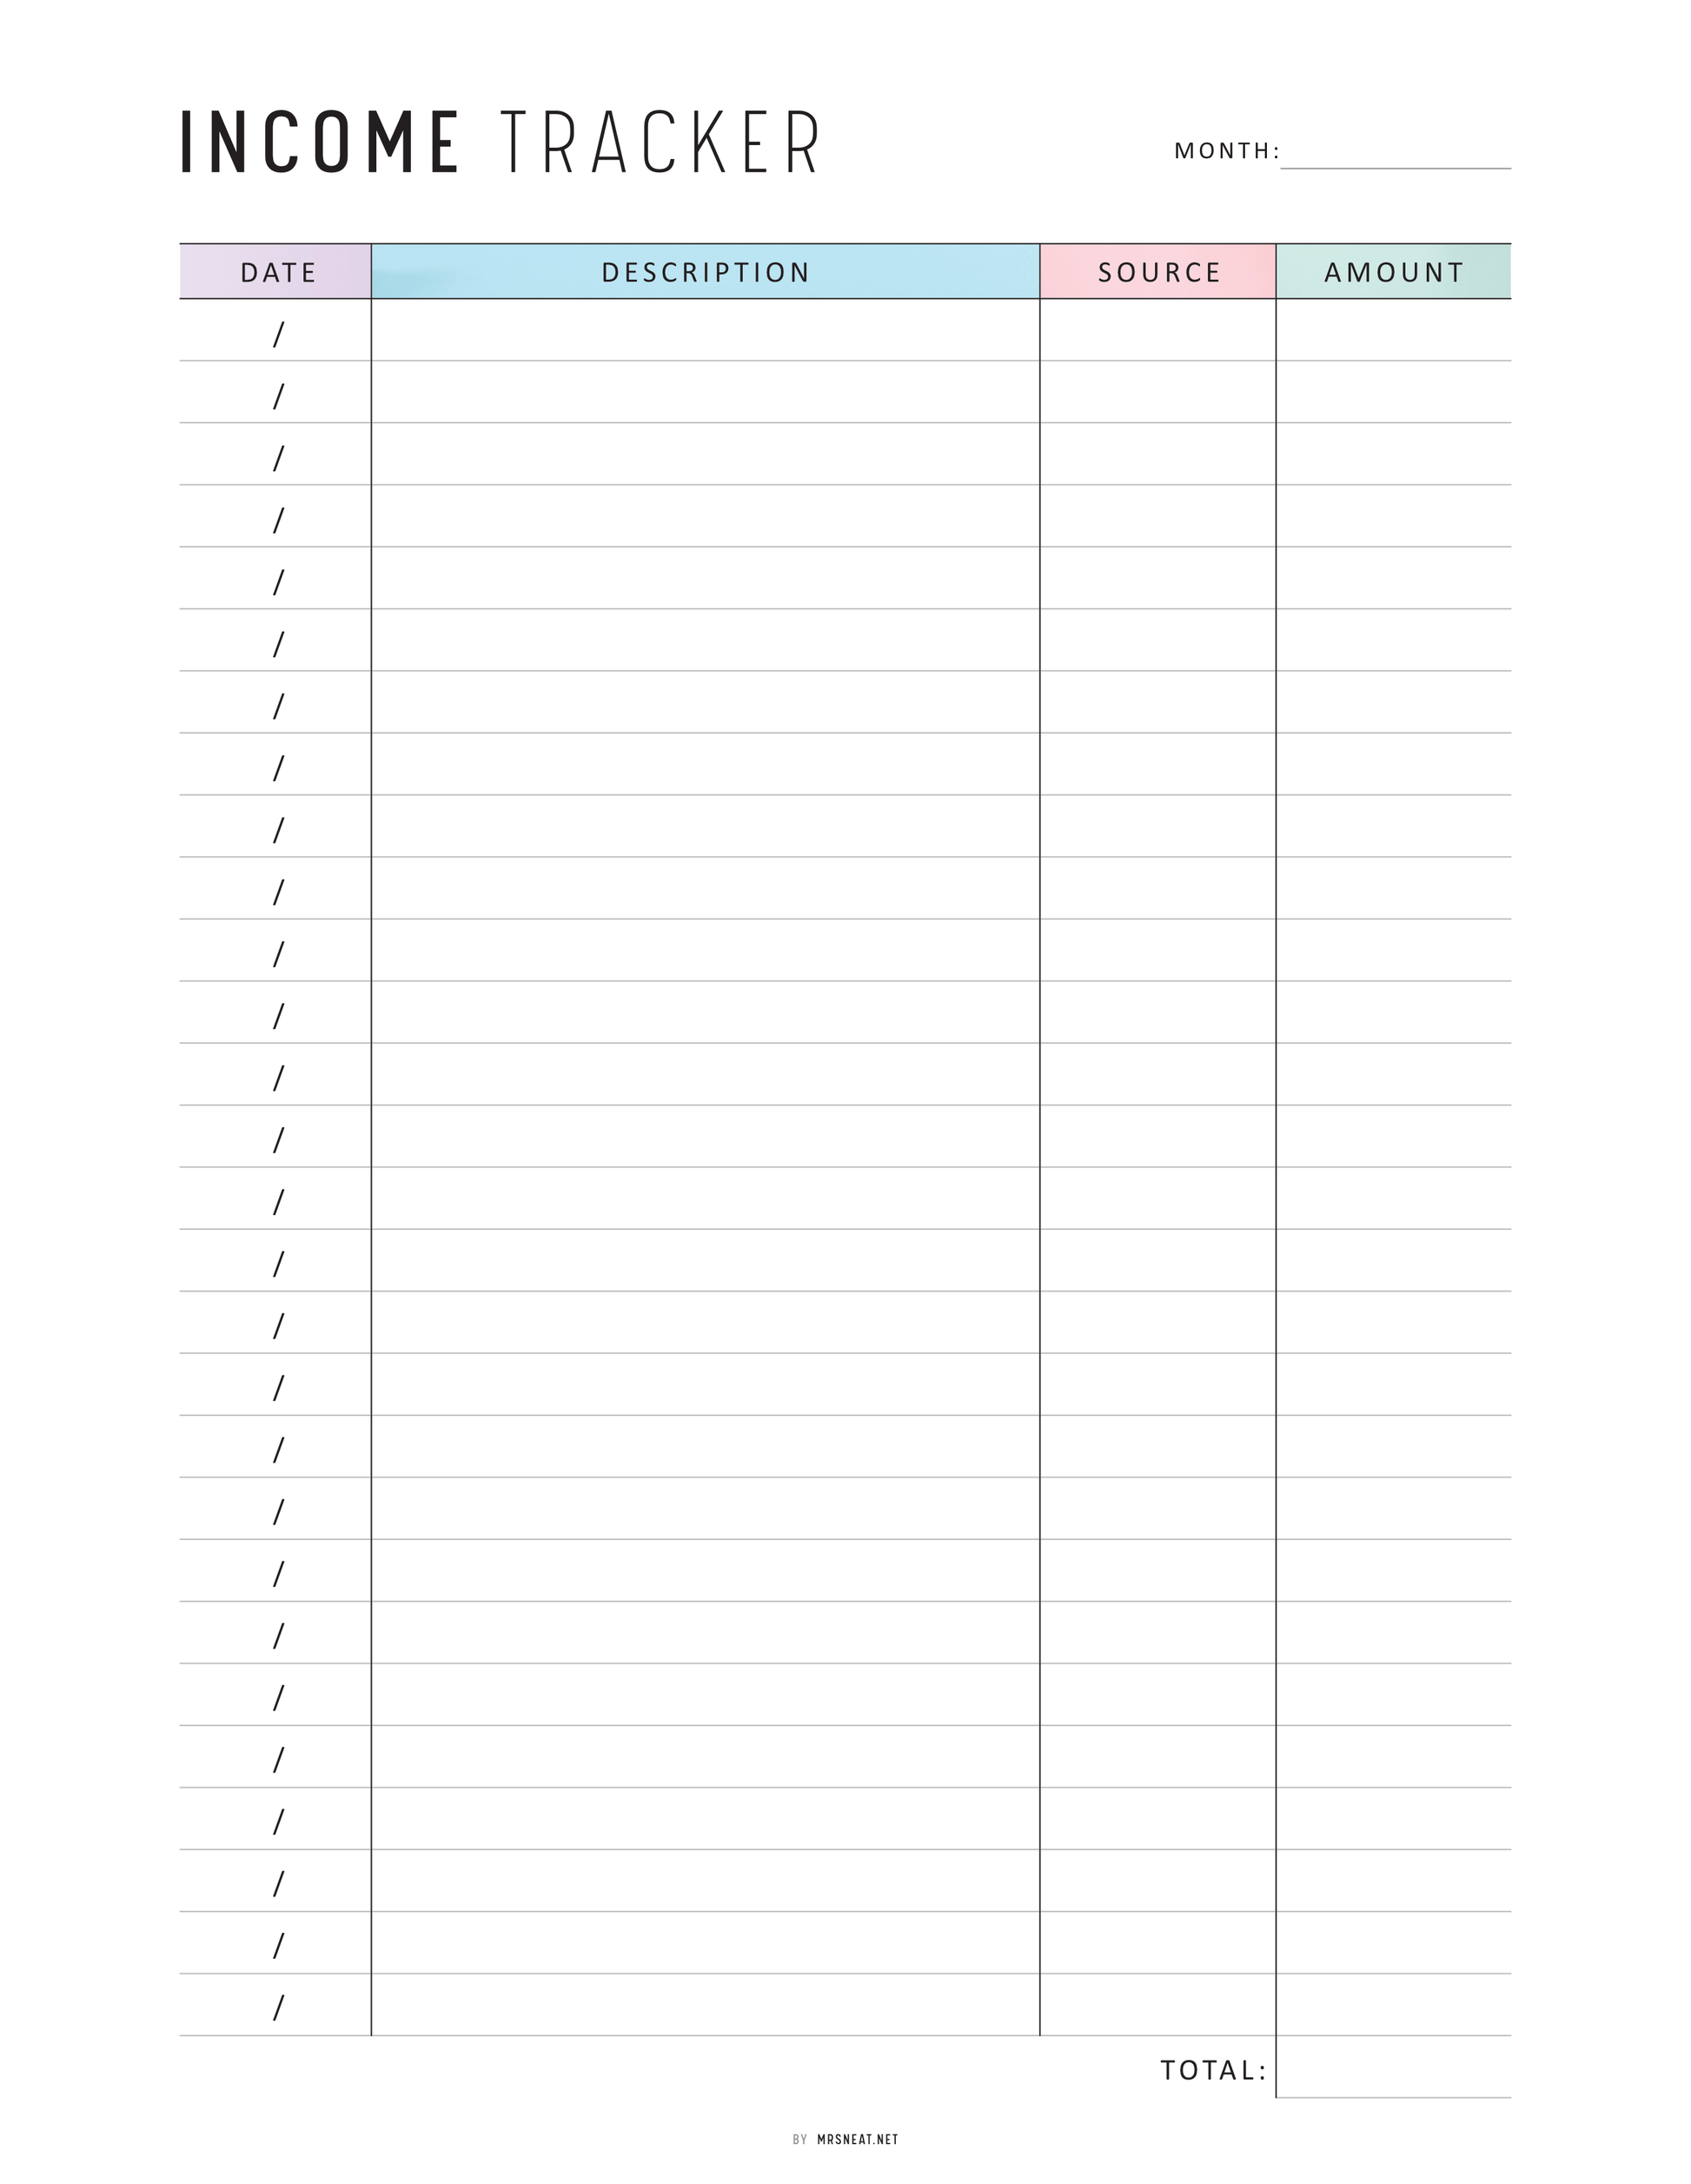 Income Tracker Printable, A4, A5, Letter, Half Letter, Digital Income Tracker, Neutral & Colorful Page